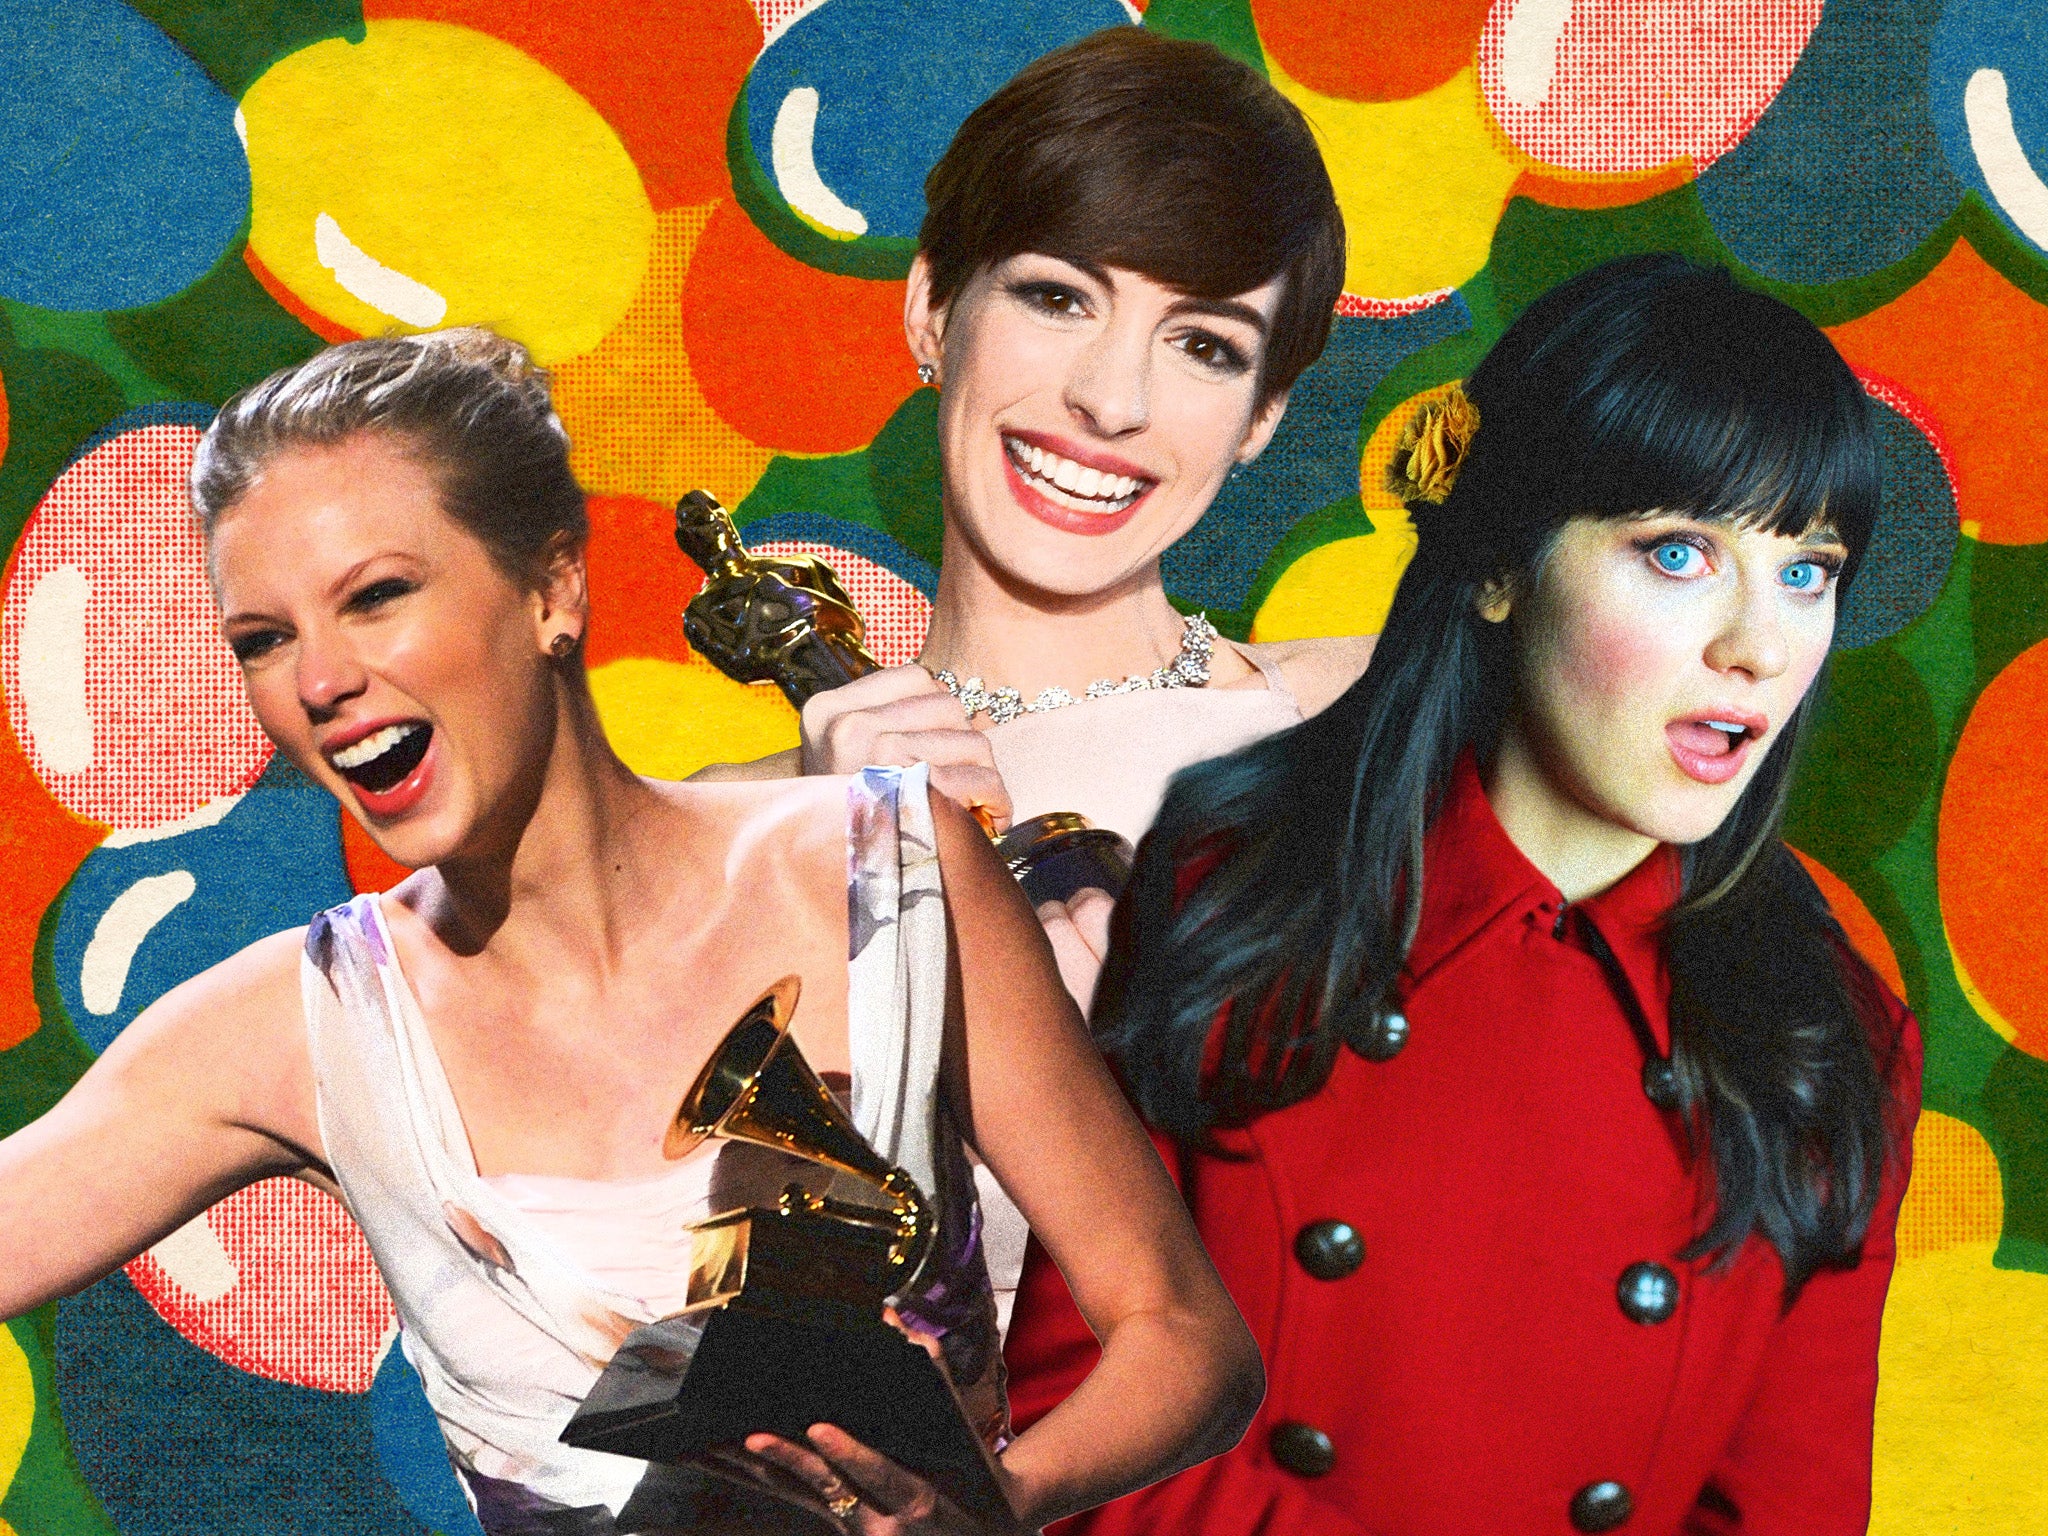 Once deemed too sweet, too eager, too open: Taylor Swift, Anne Hathaway and Zooey Deschanel at peak public earnestness